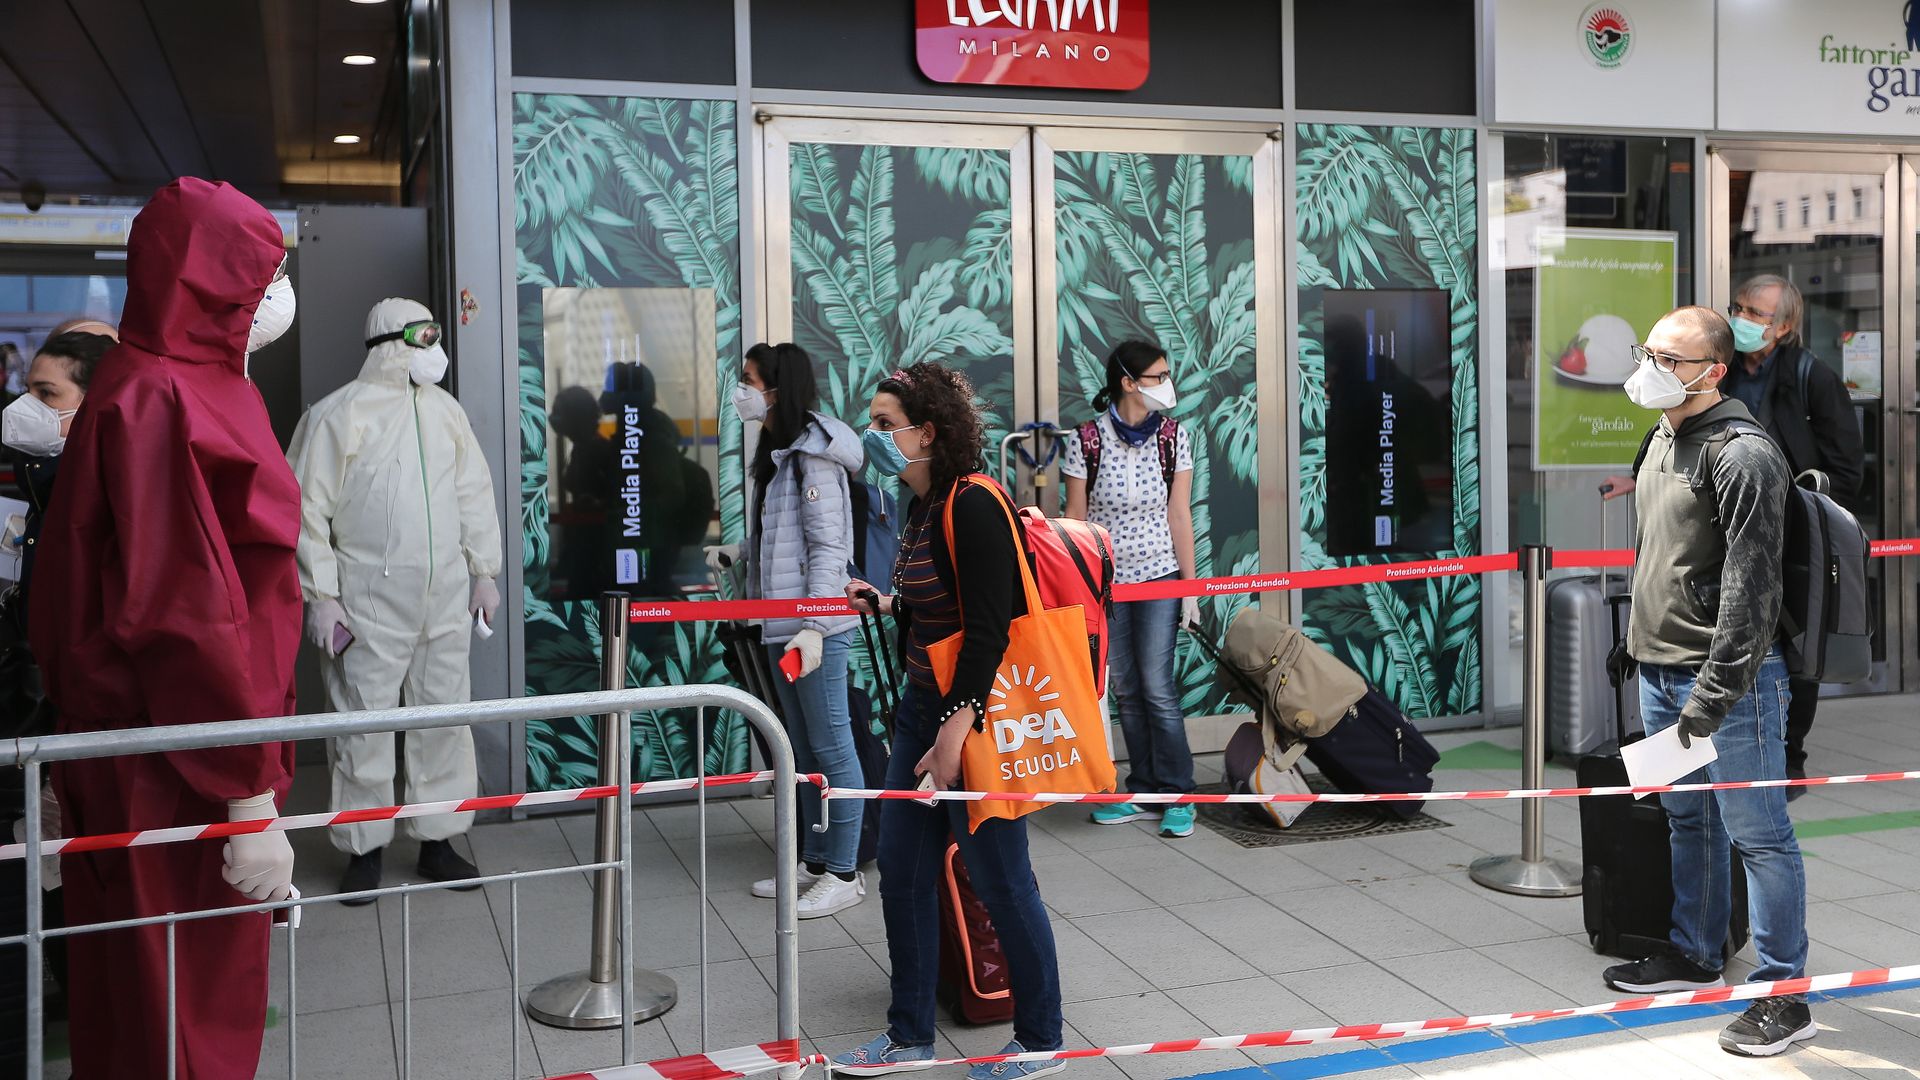 In this image, people stand in line wearing masks outside a store